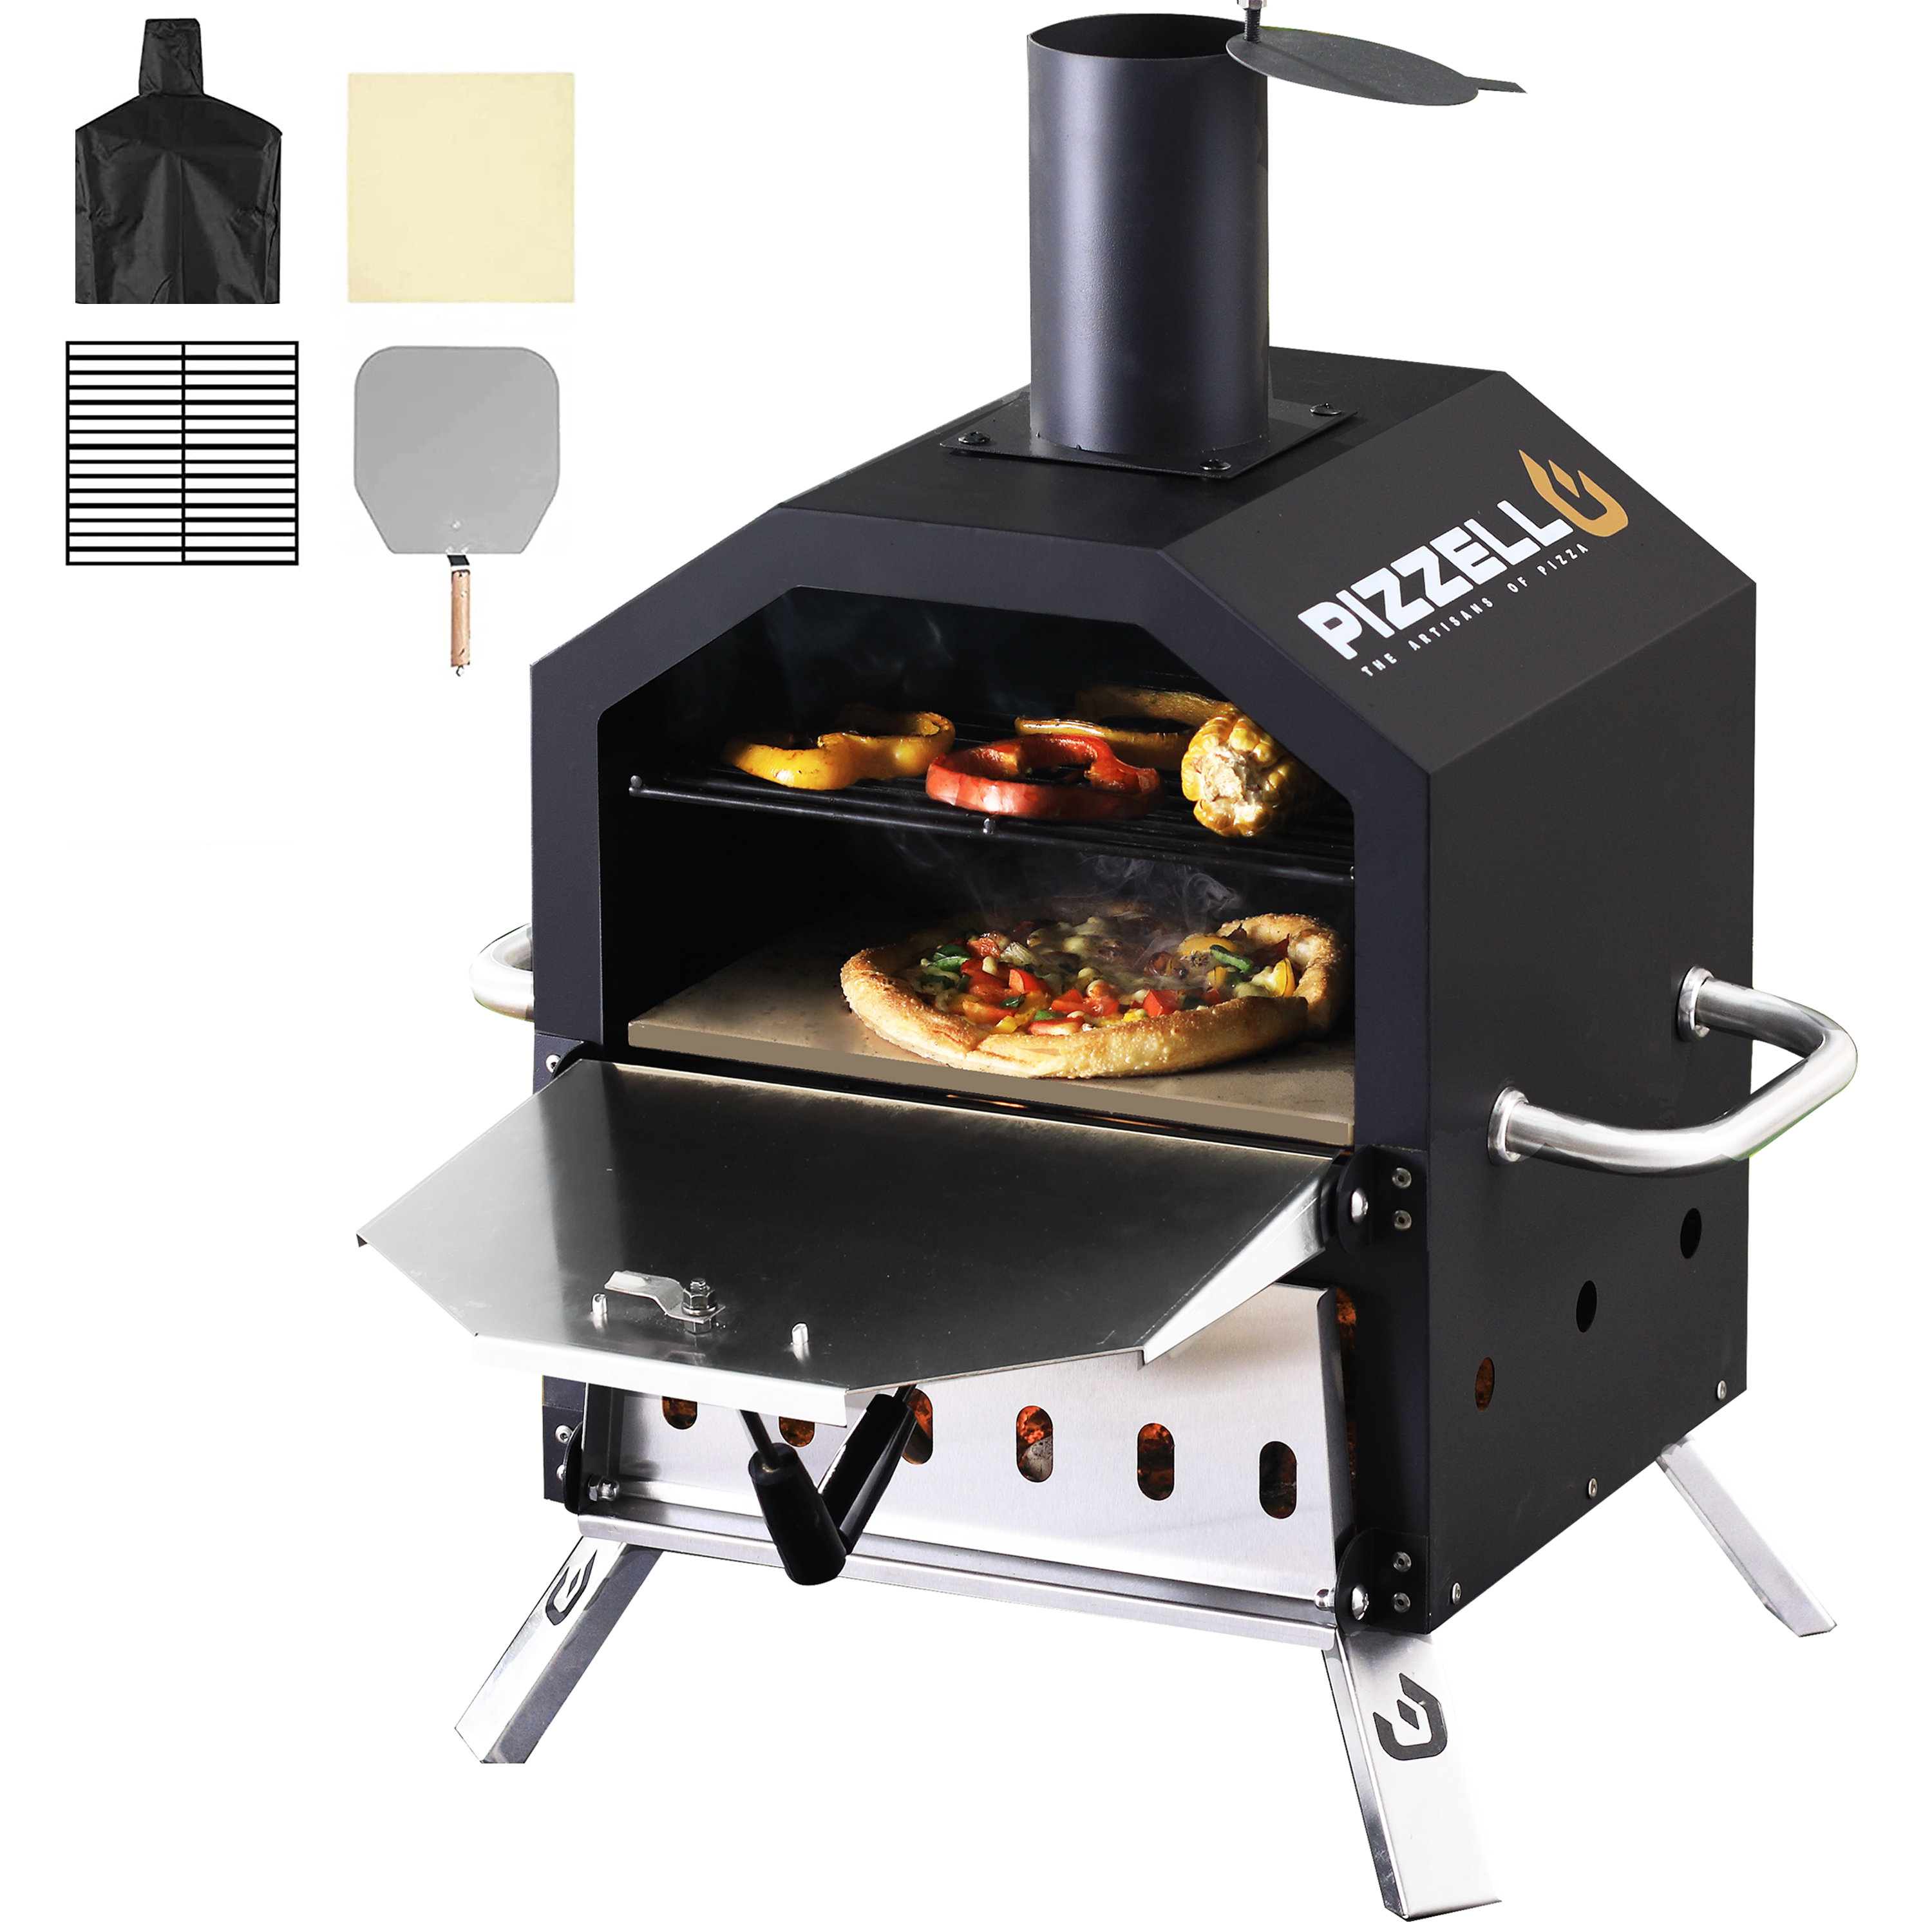 PIZZA OVEN Grill Pizza Pan 12 w Folding Wood Handle, Non-Stick, Air Vents  NEW!!